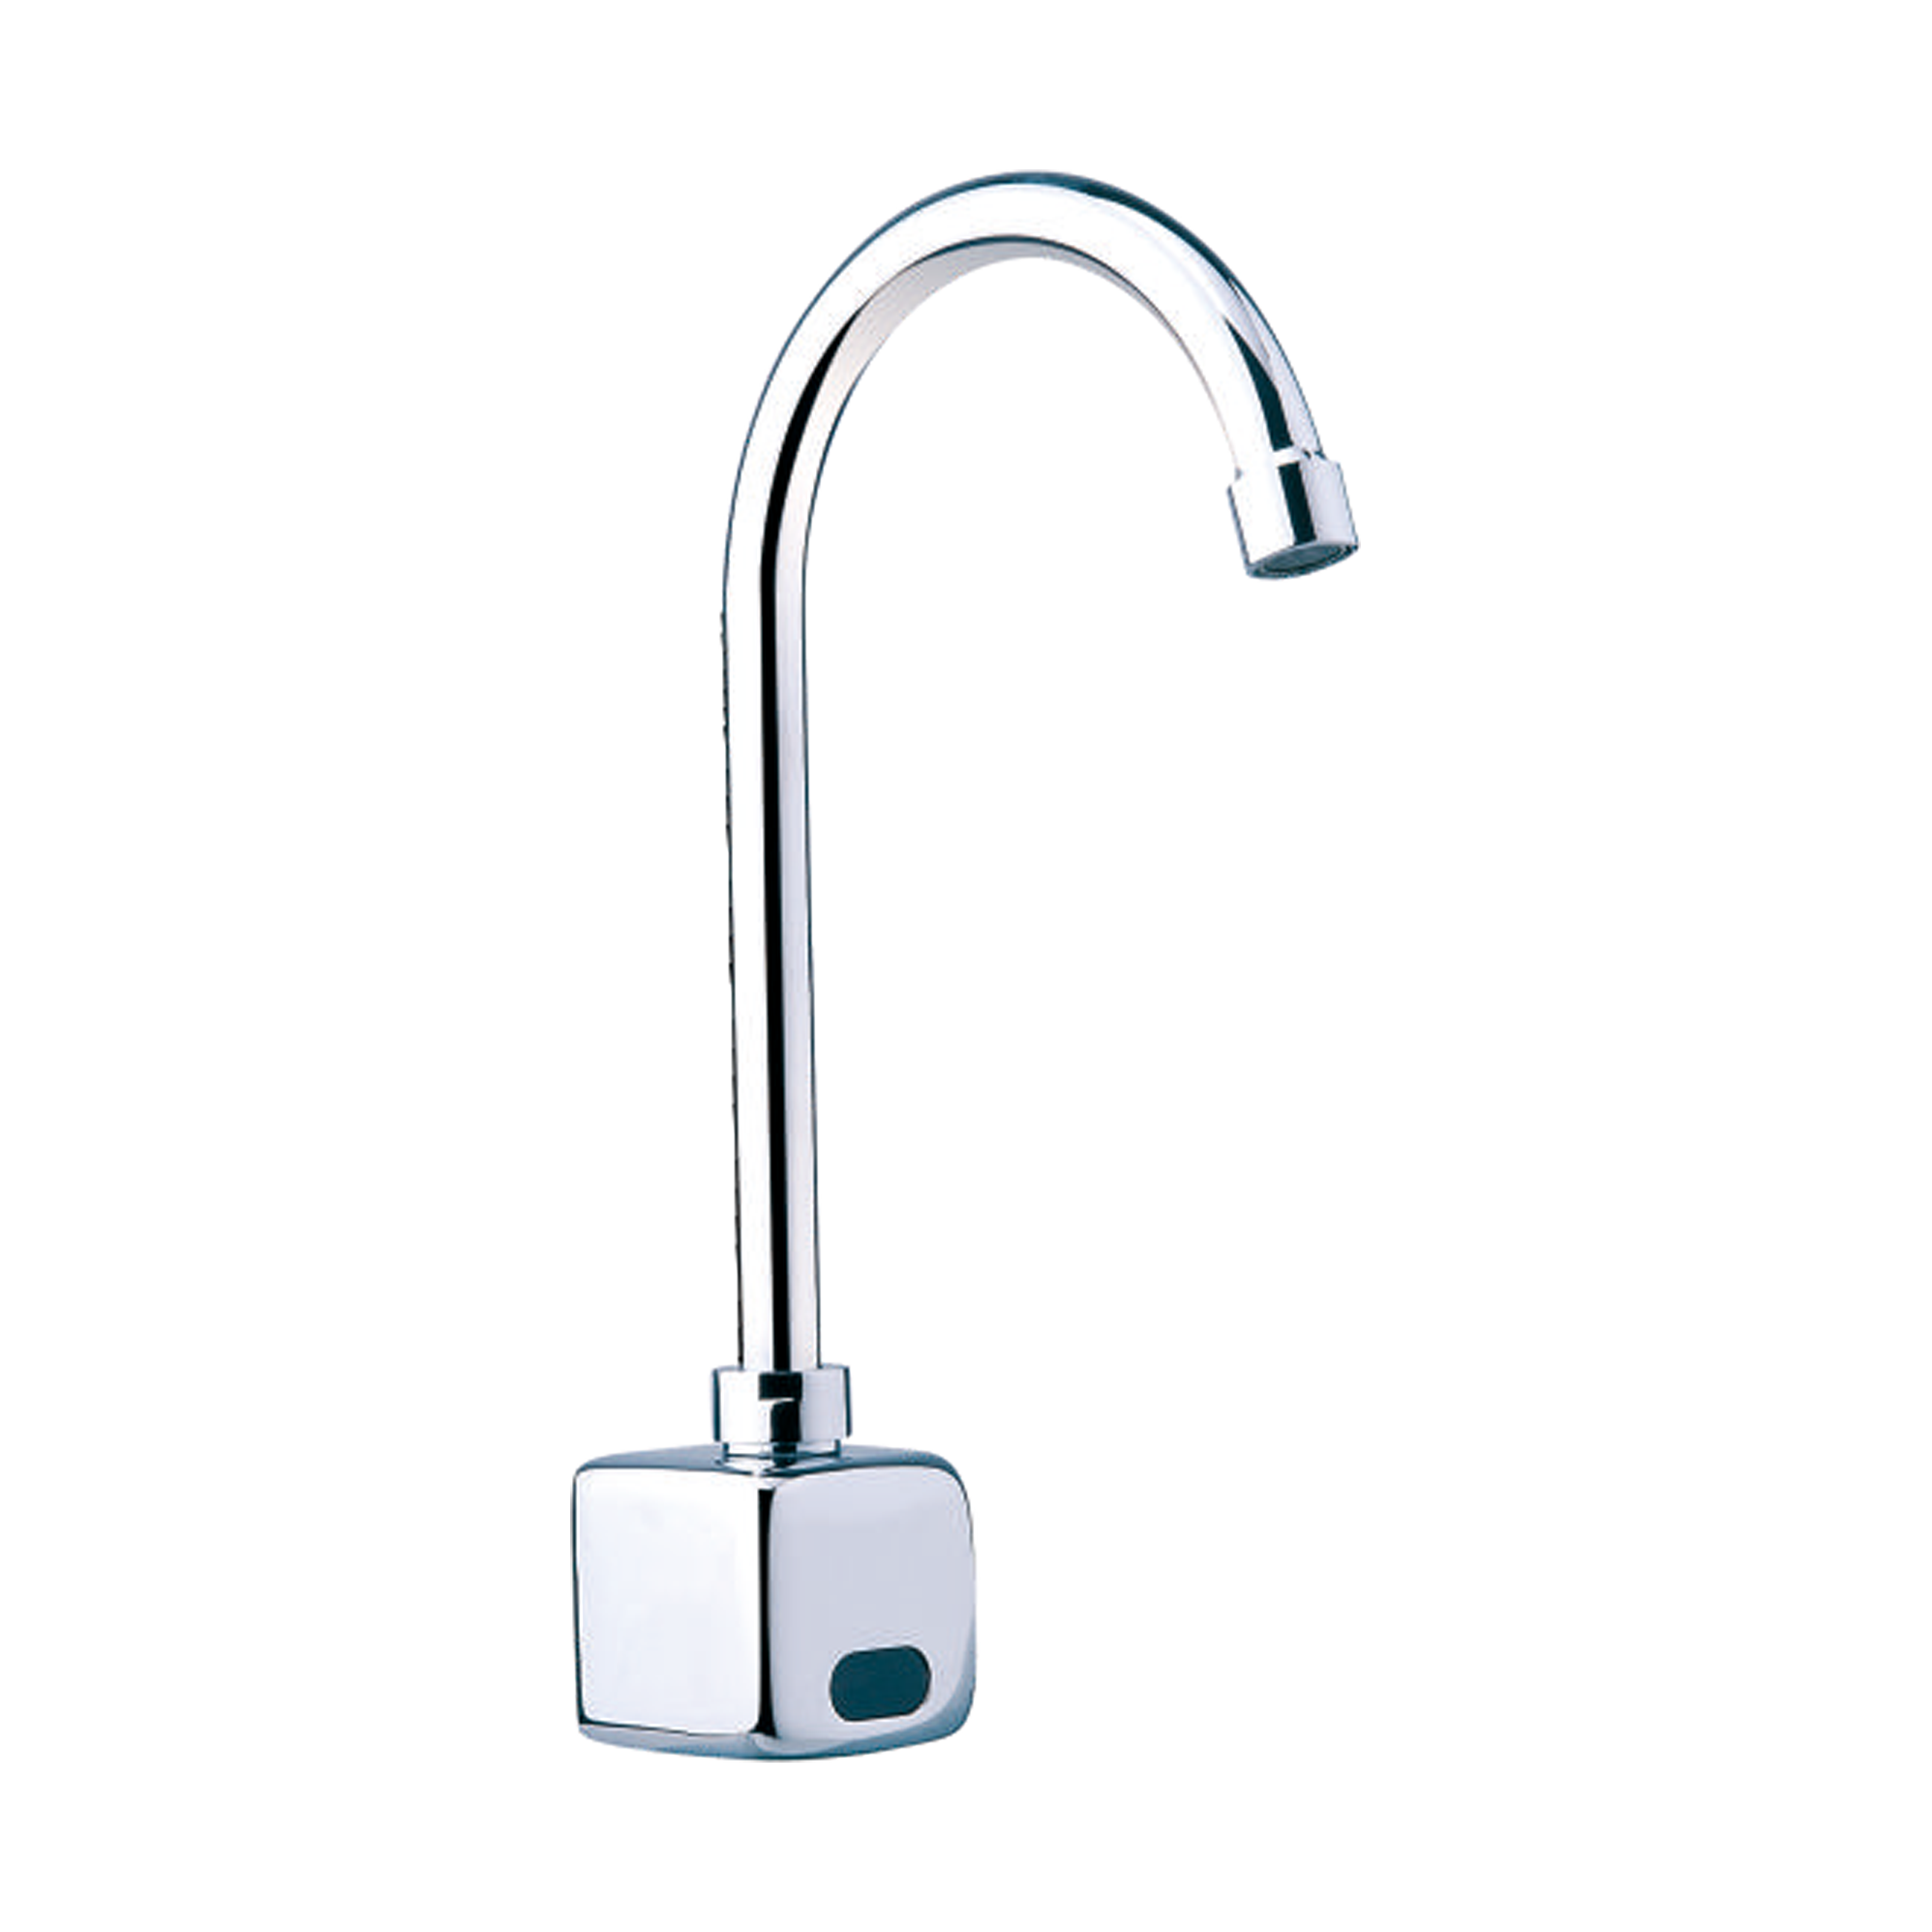 Top-rinse MS61D Single Hole Induction Faucet